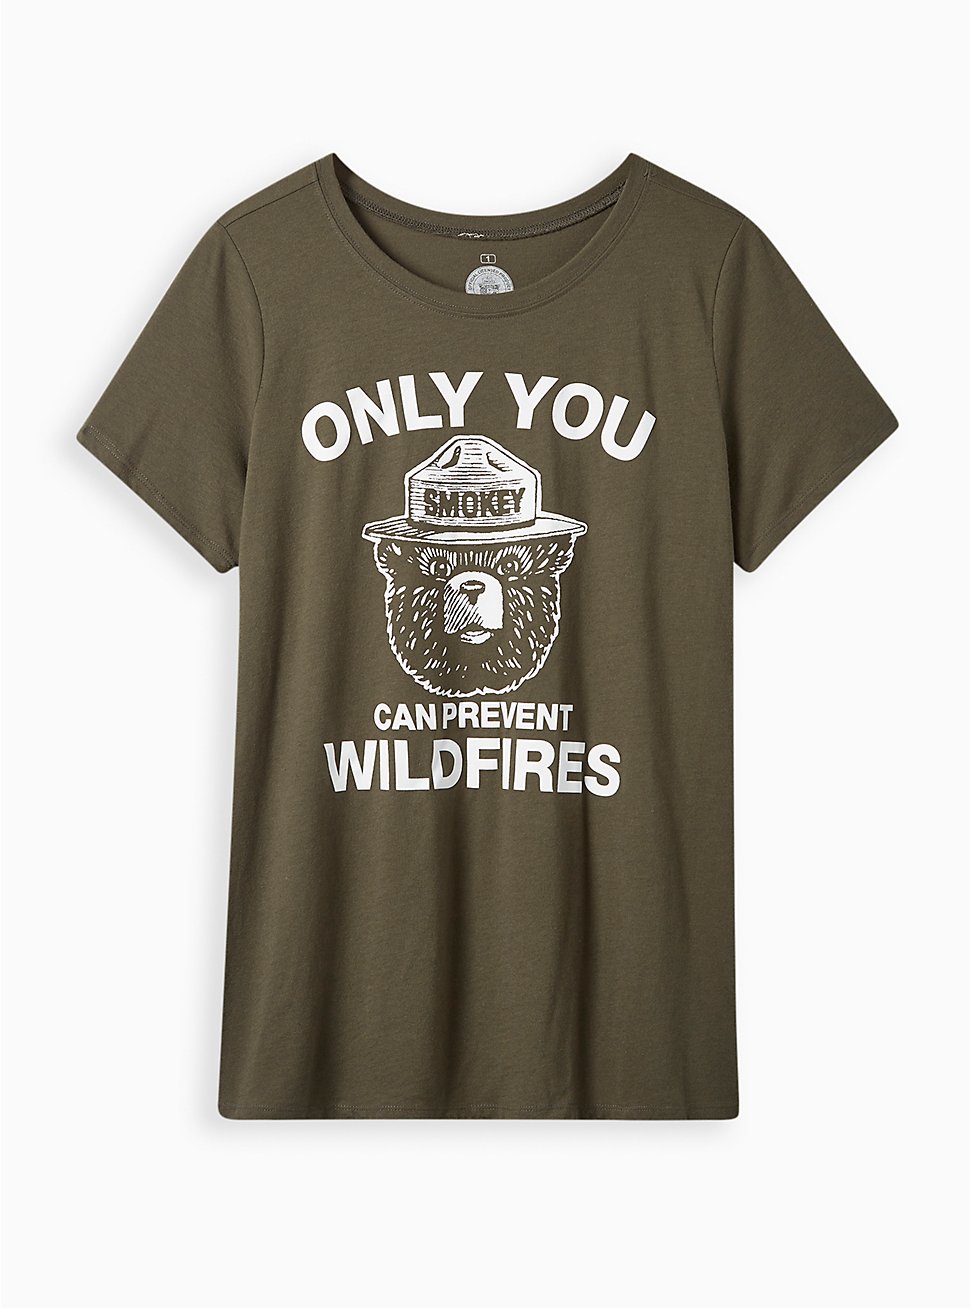 Plus Size Smokey Bear Classic Fit Tee - Signature Jersey Prevent Fires Green, DEEP DEPTHS, hi-res